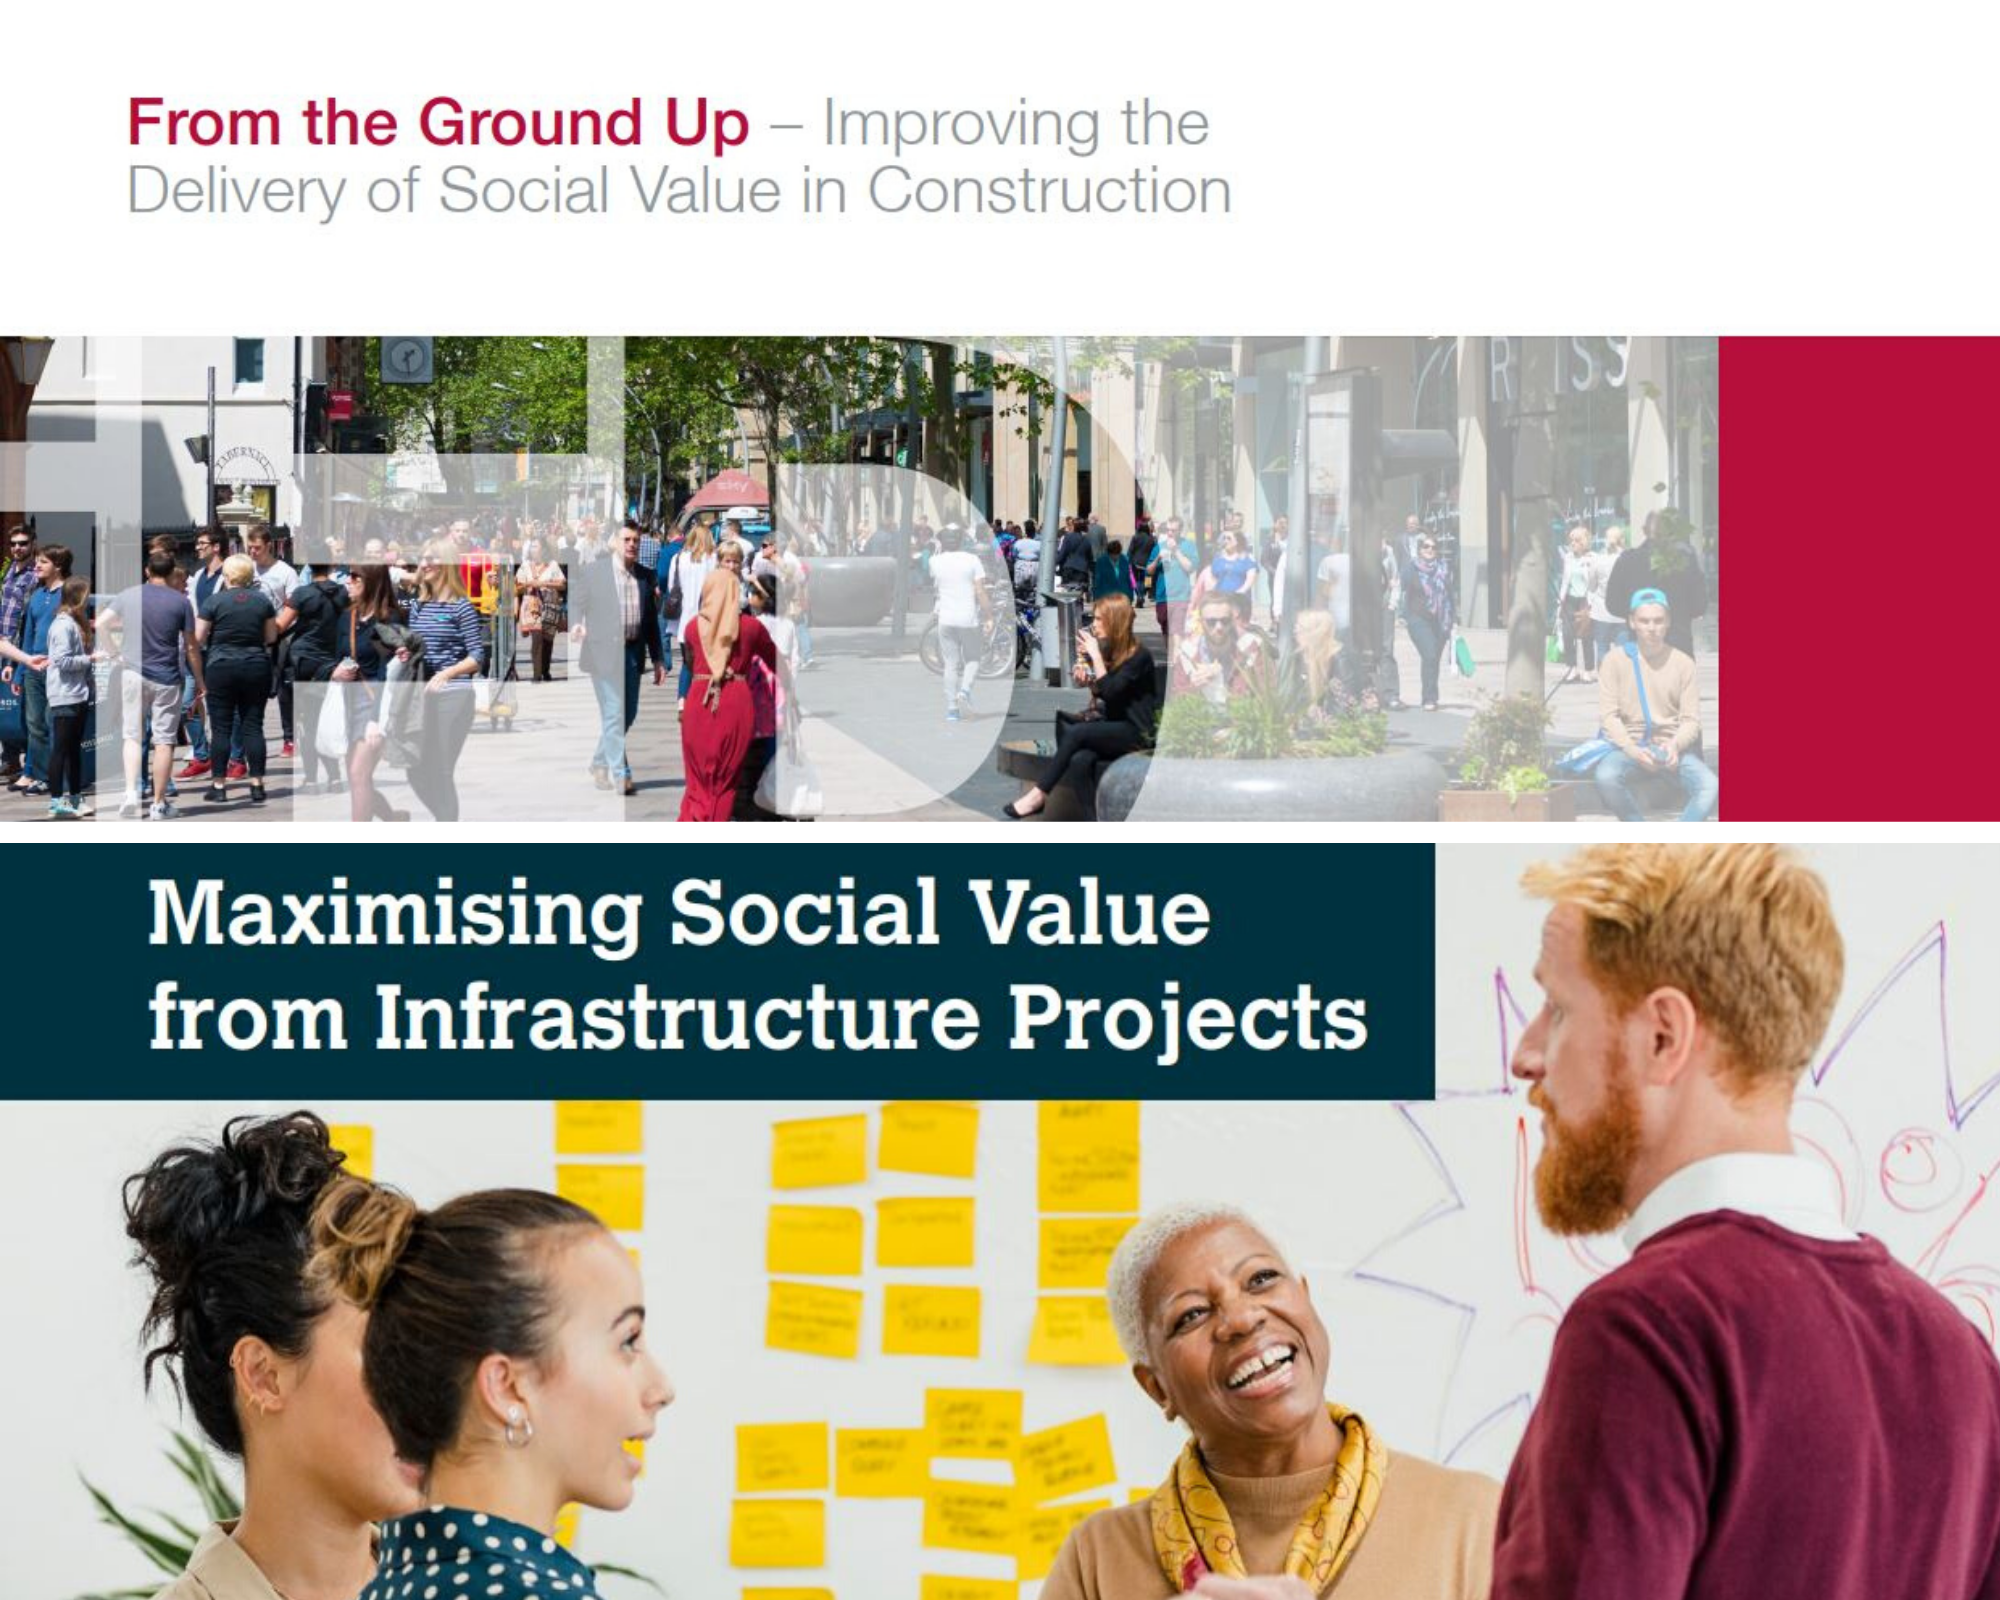 Two reports launched on Social Value provision image